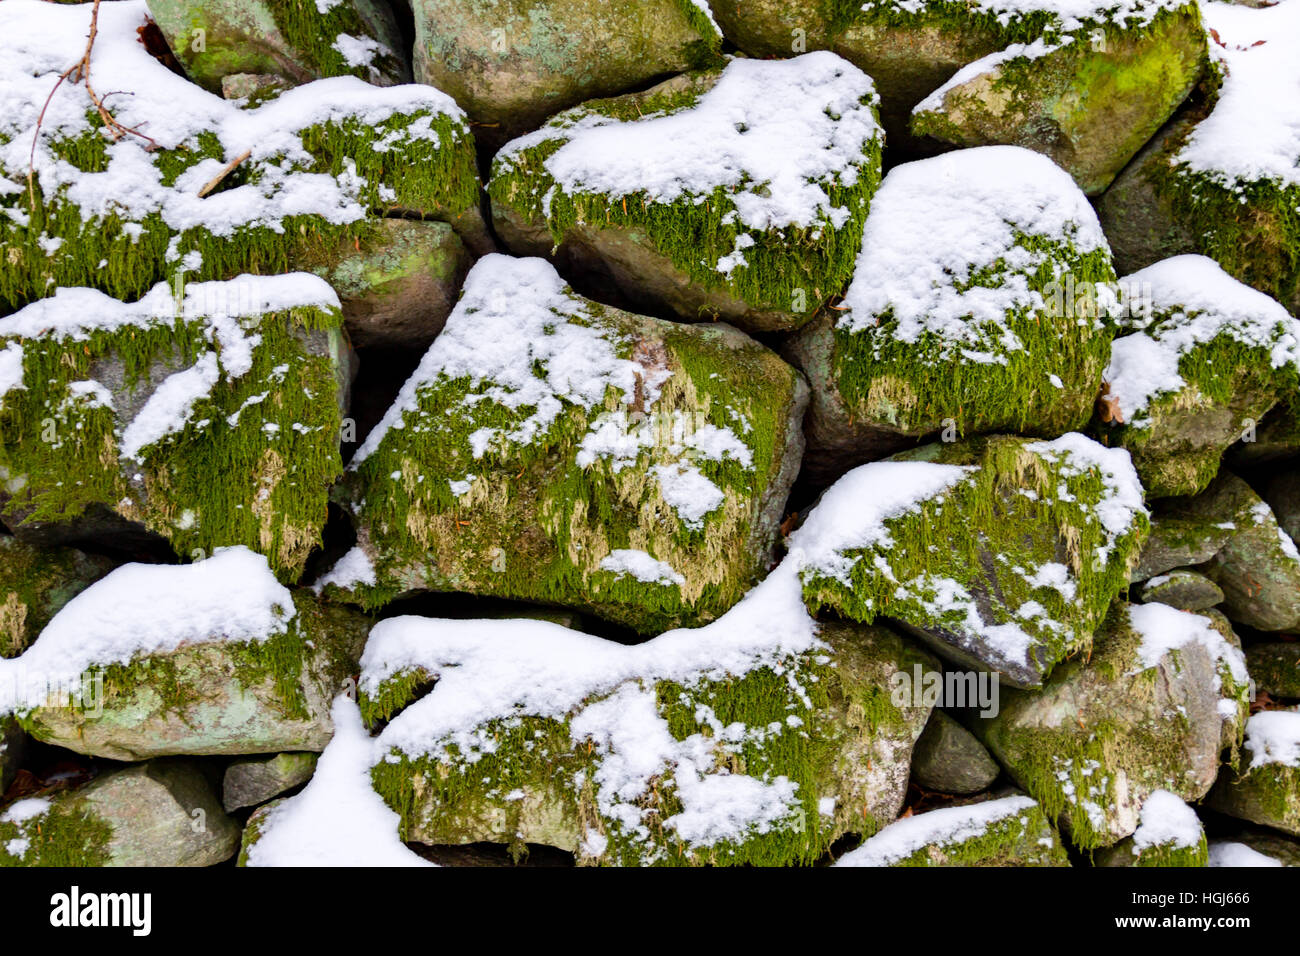 Rocks in a stone wall covered with moss, lichen and snow Stock Photo